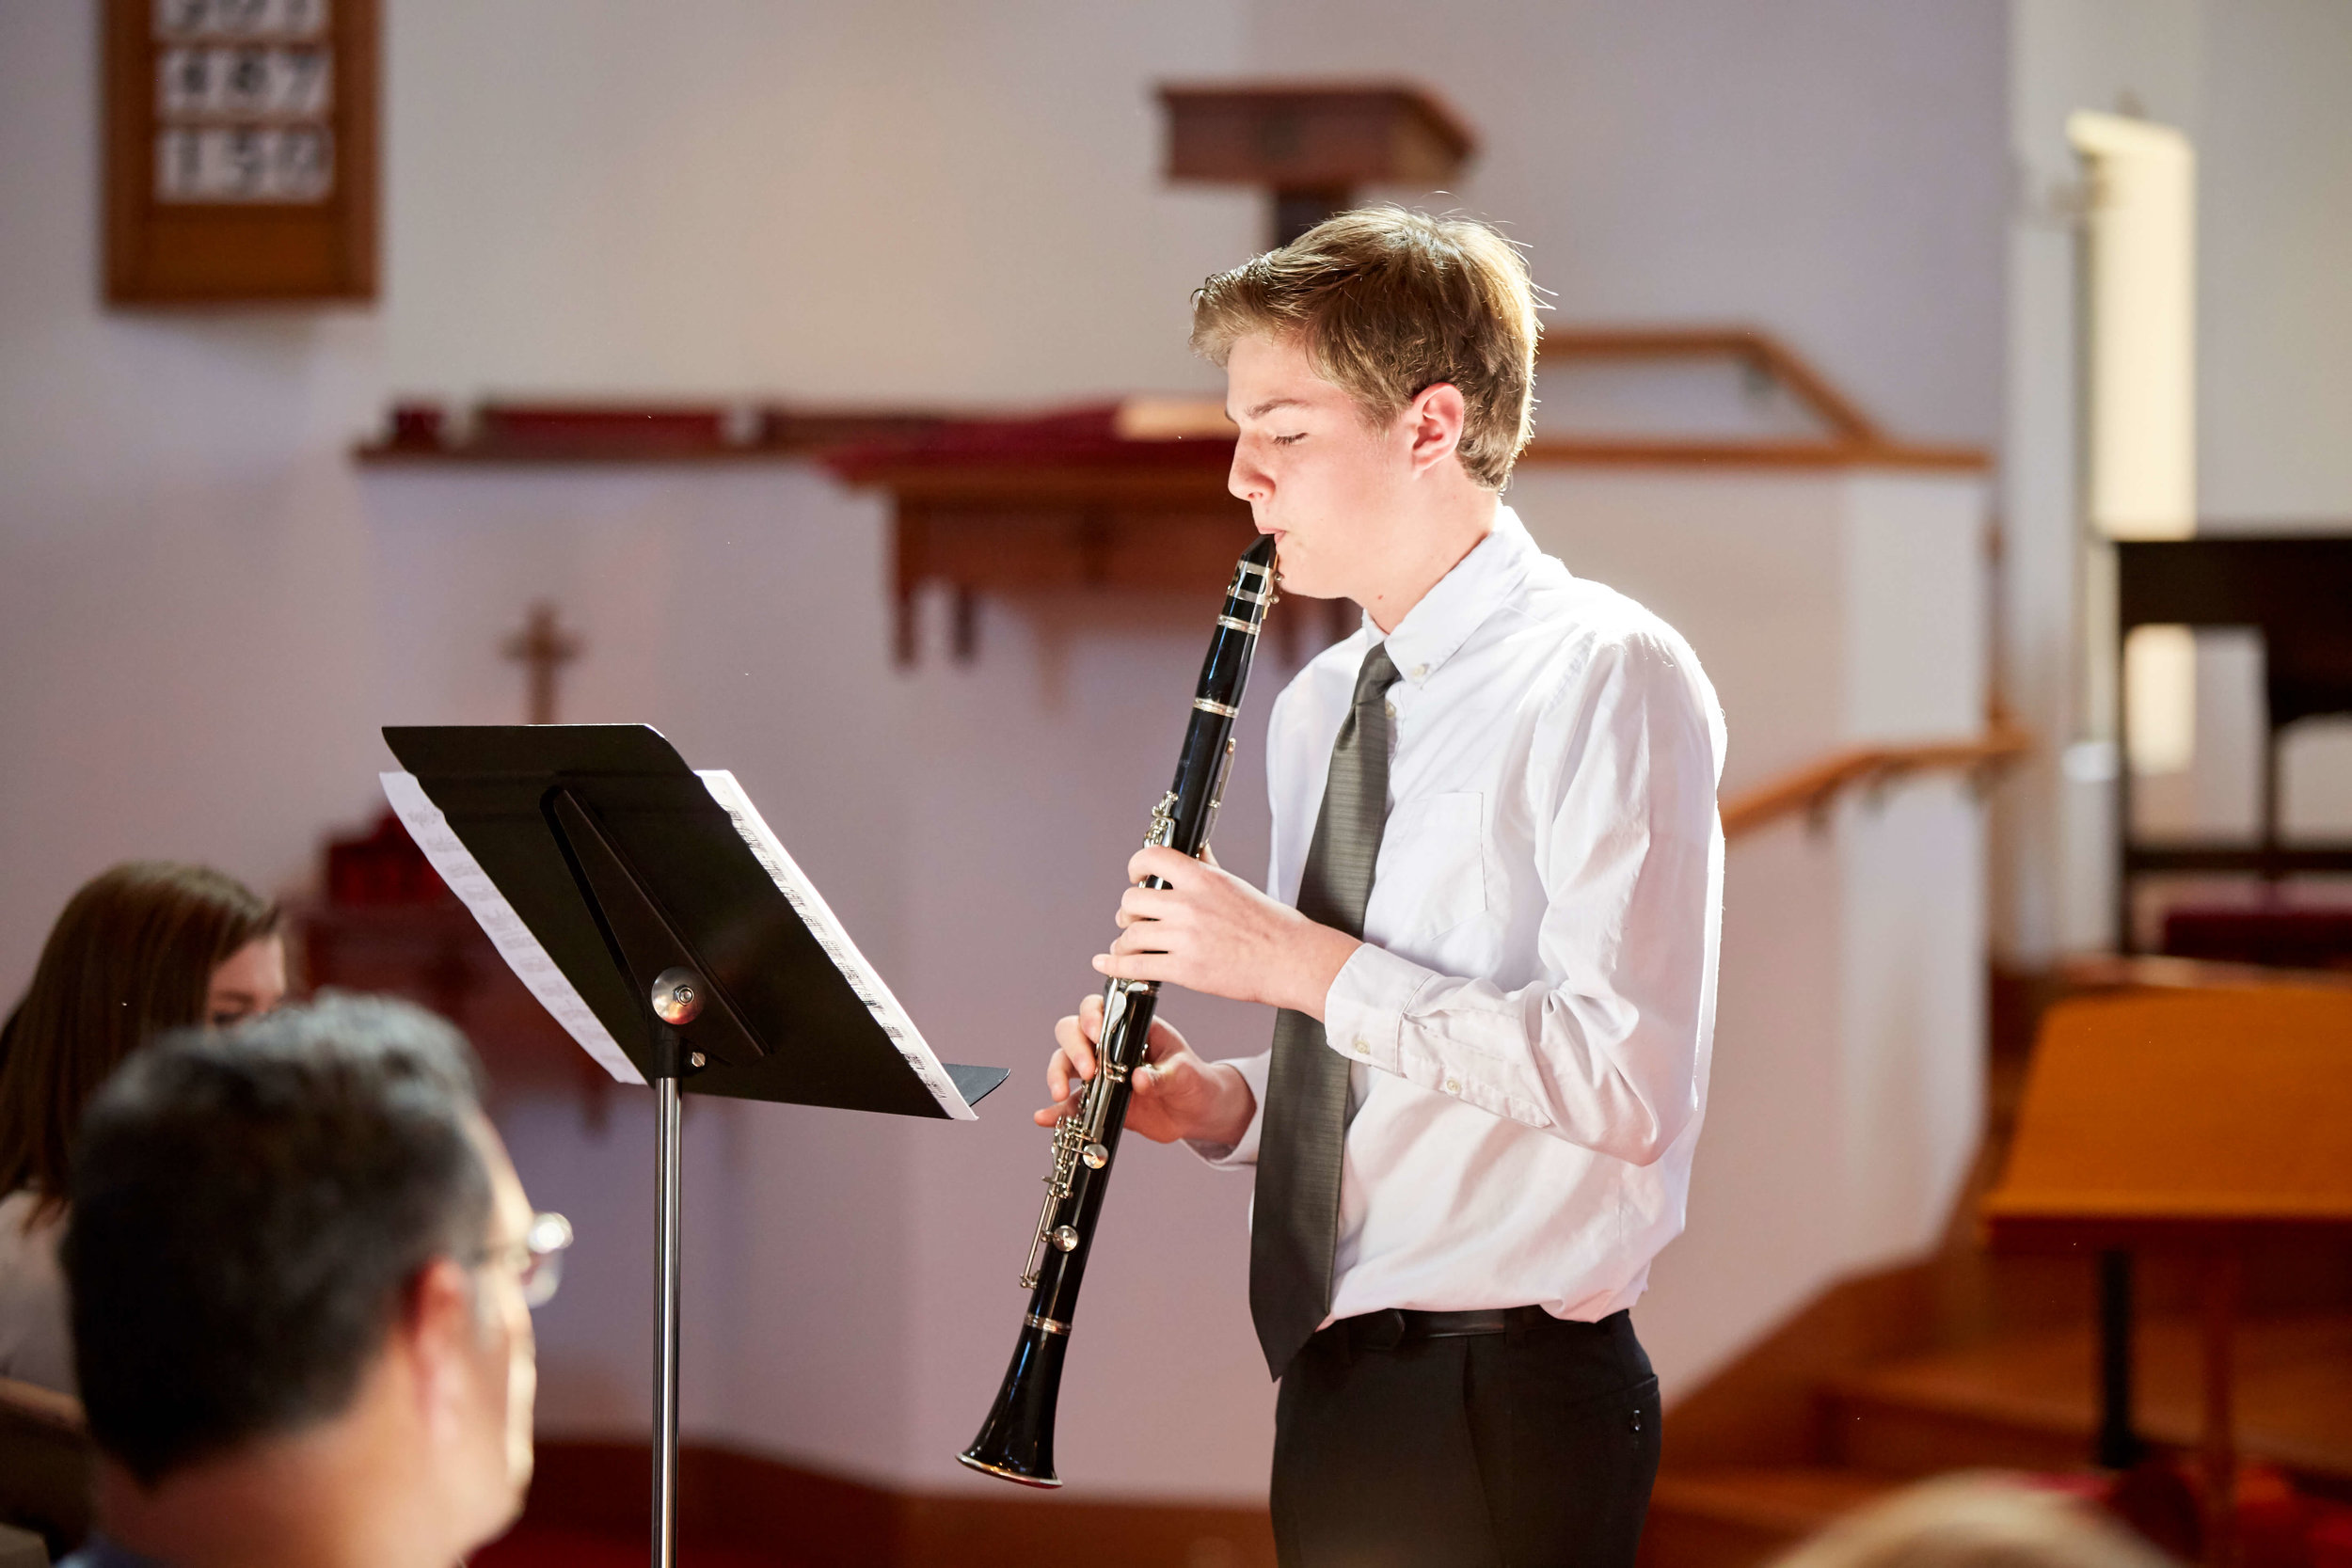   FLUTE &amp; CLARINET LESSONS IN CINCINNATI   for beginner, intermediate, and advanced students  CALL  513-560-9175  TODAY TO SCHEDULE YOUR FIRST LESSON   Request Info  